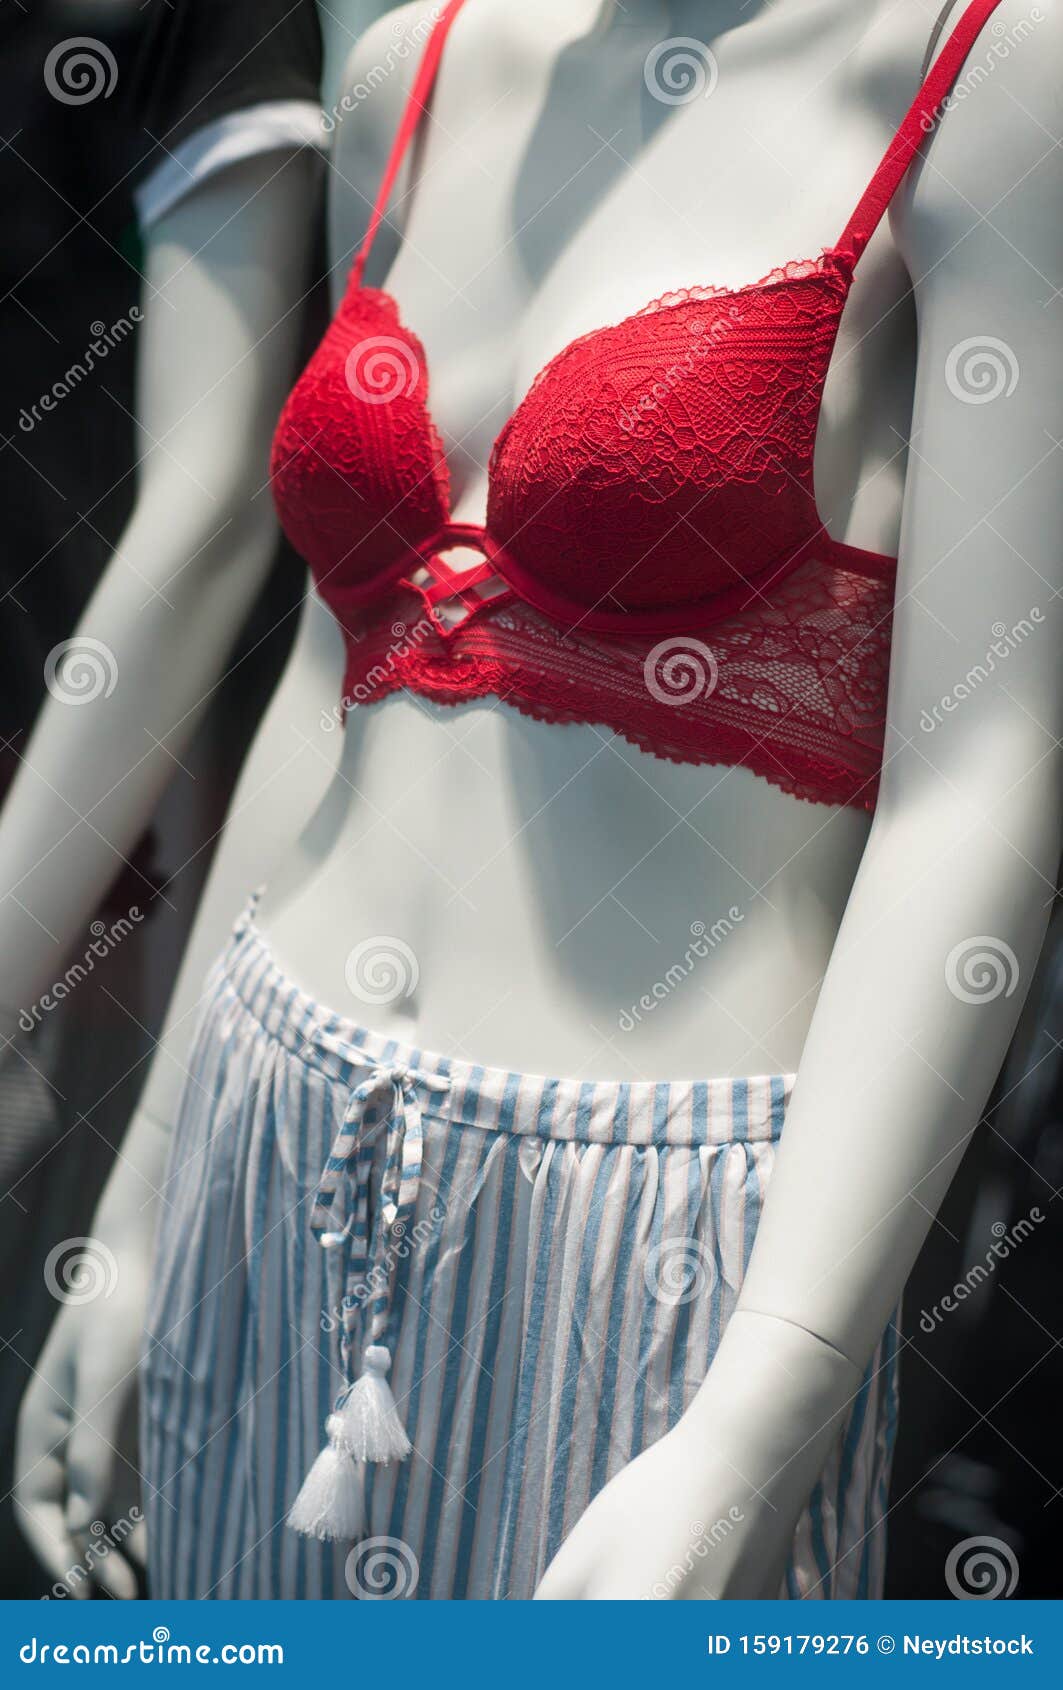 Red Bra and Pajamas on Mannequin in Fashion Store Showroom for